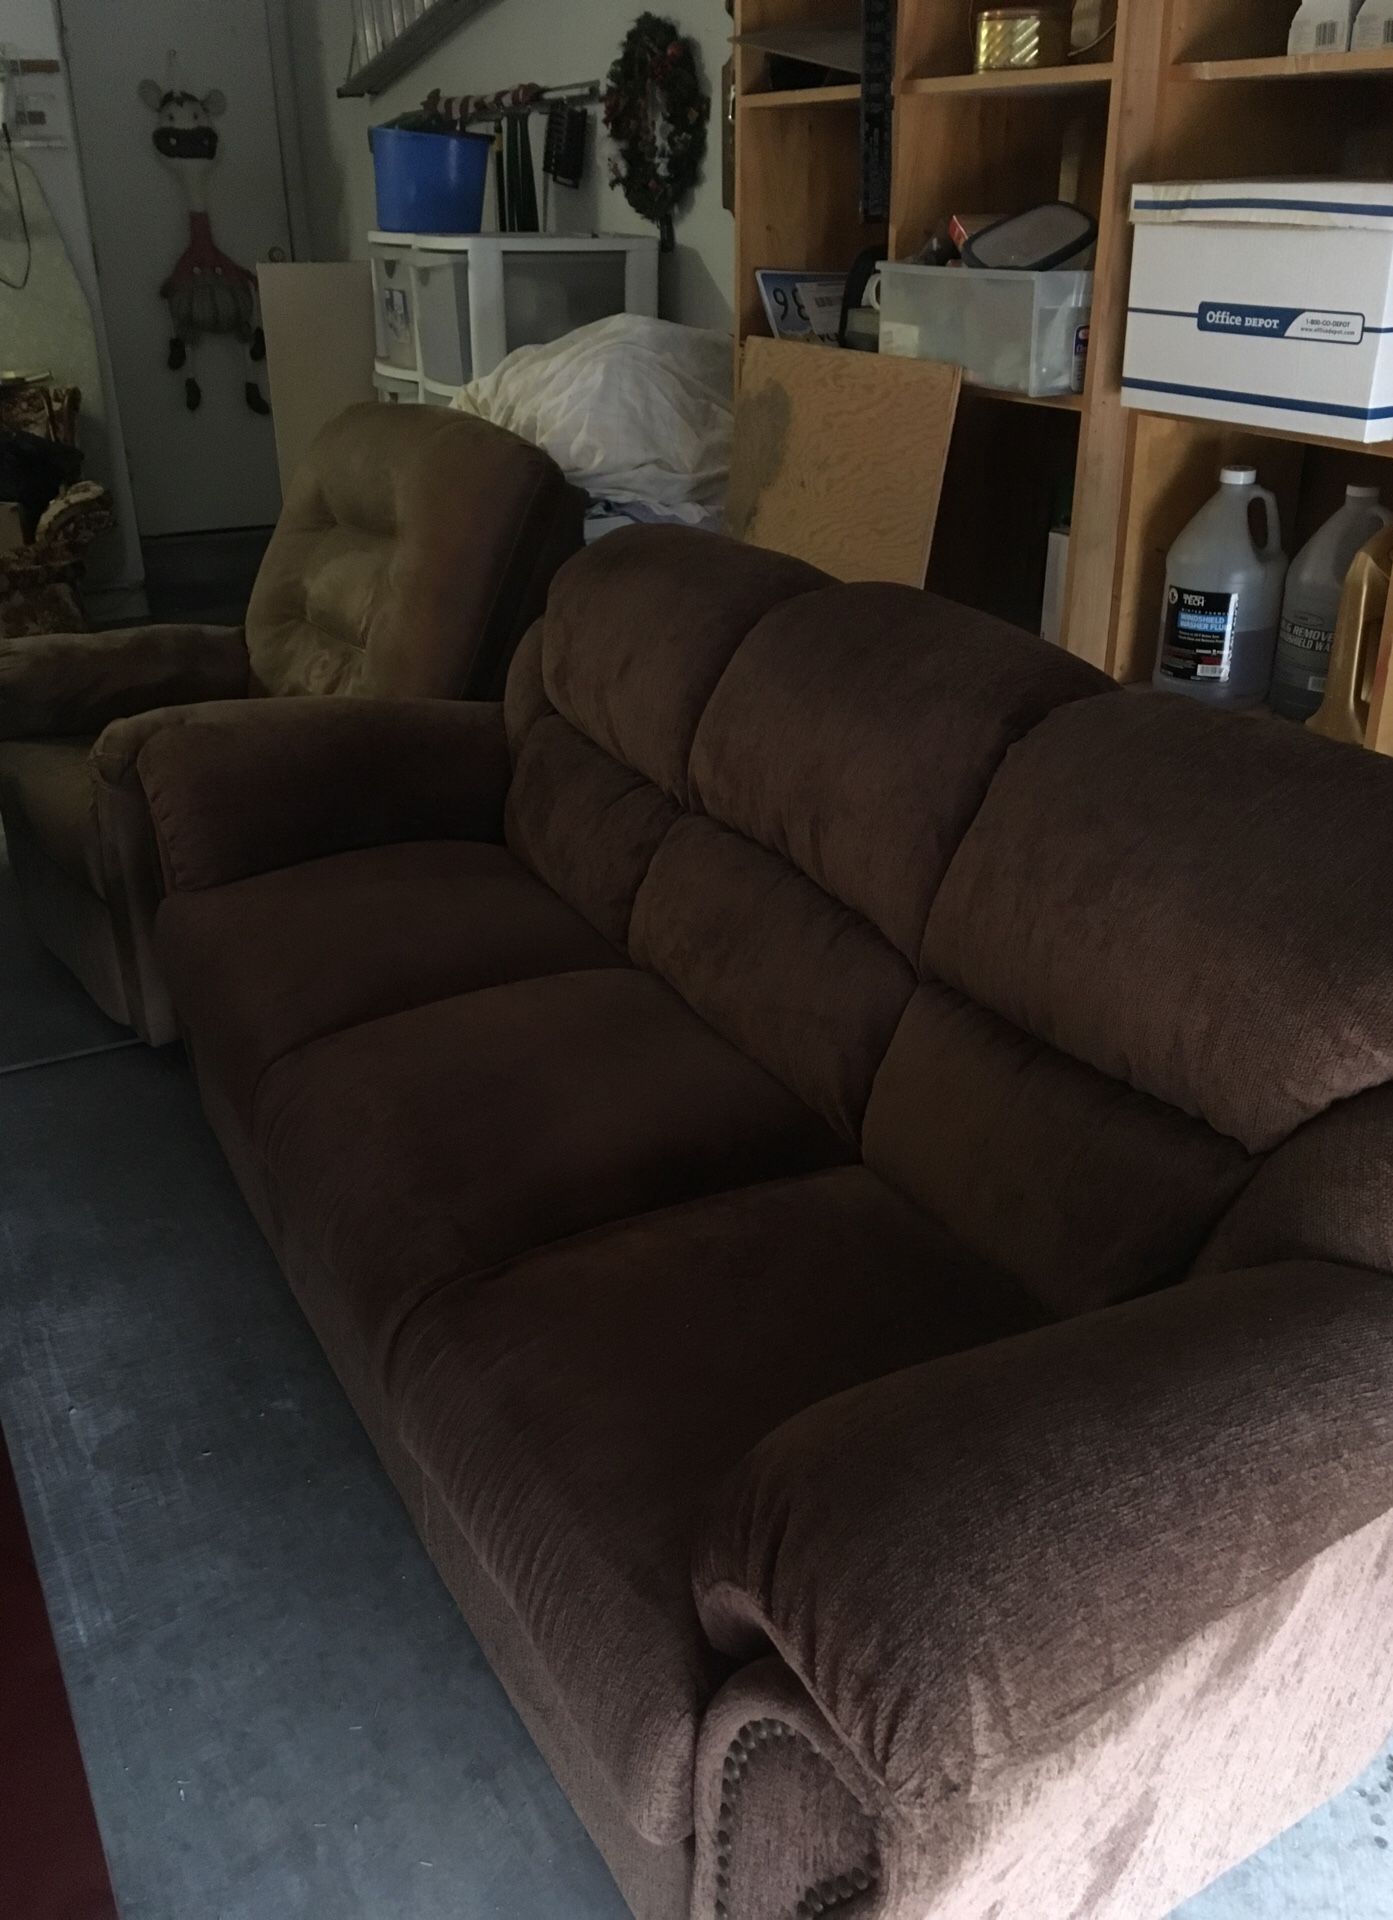 Recliner used, sofa in great condition, like new